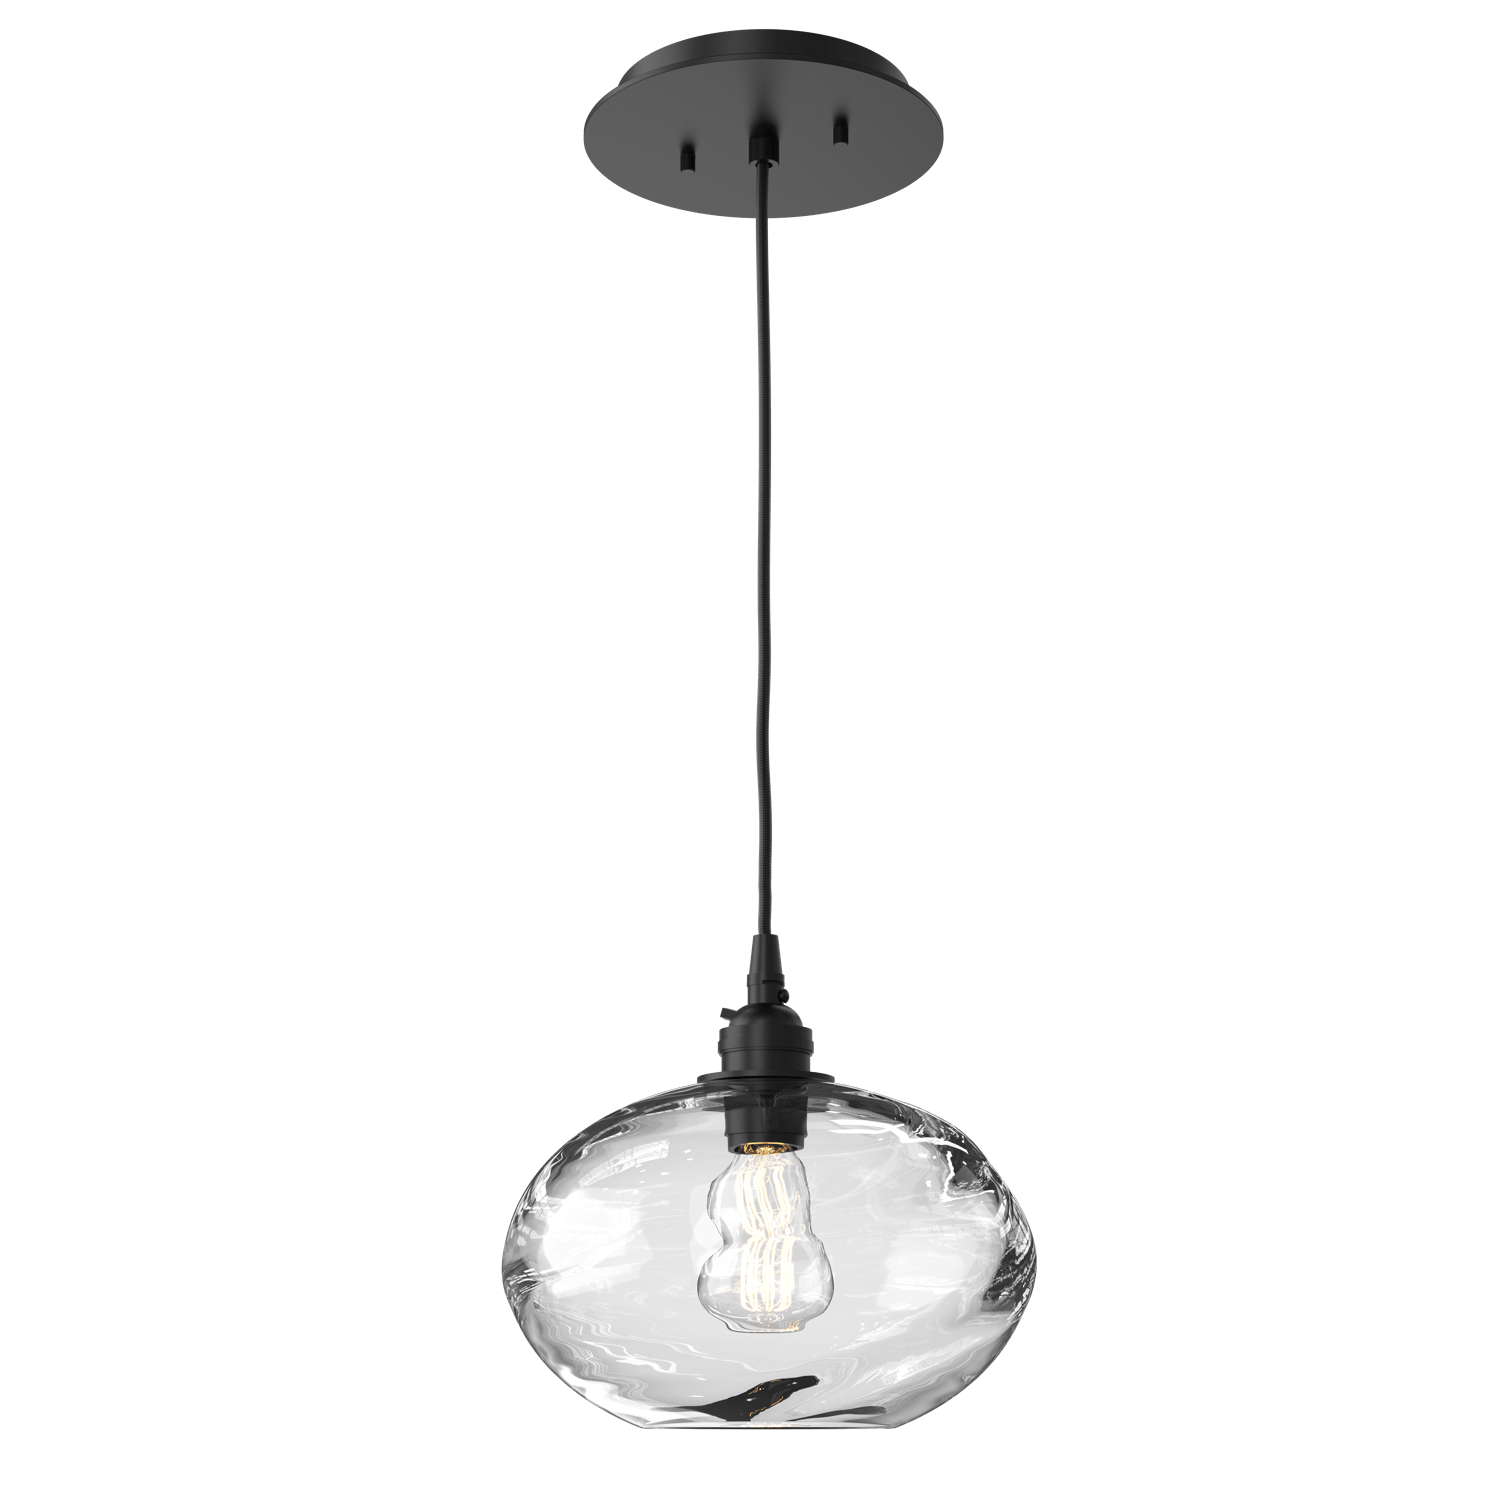 LAB0036-01-MB-OC-Hammerton-Studio-Optic-Blown-Glass-Coppa-pendant-light-with-matte-black-finish-and-optic-clear-blown-glass-shades-and-incandescent-lamping